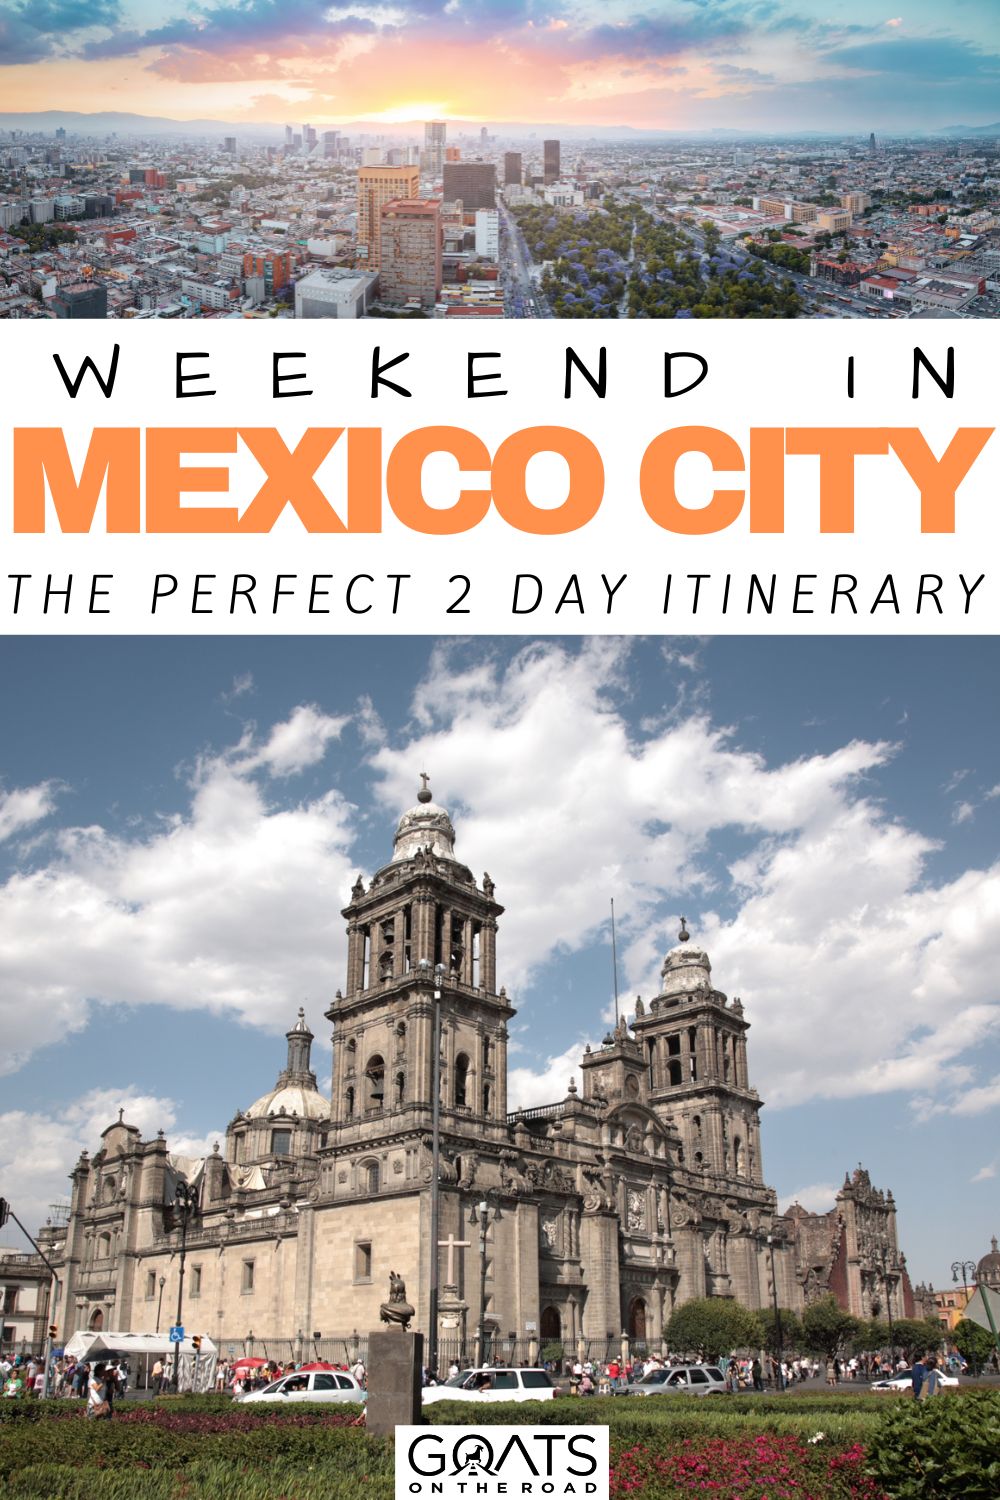 “Weekend in Mexico City: The Perfect 2 Day Itinerary